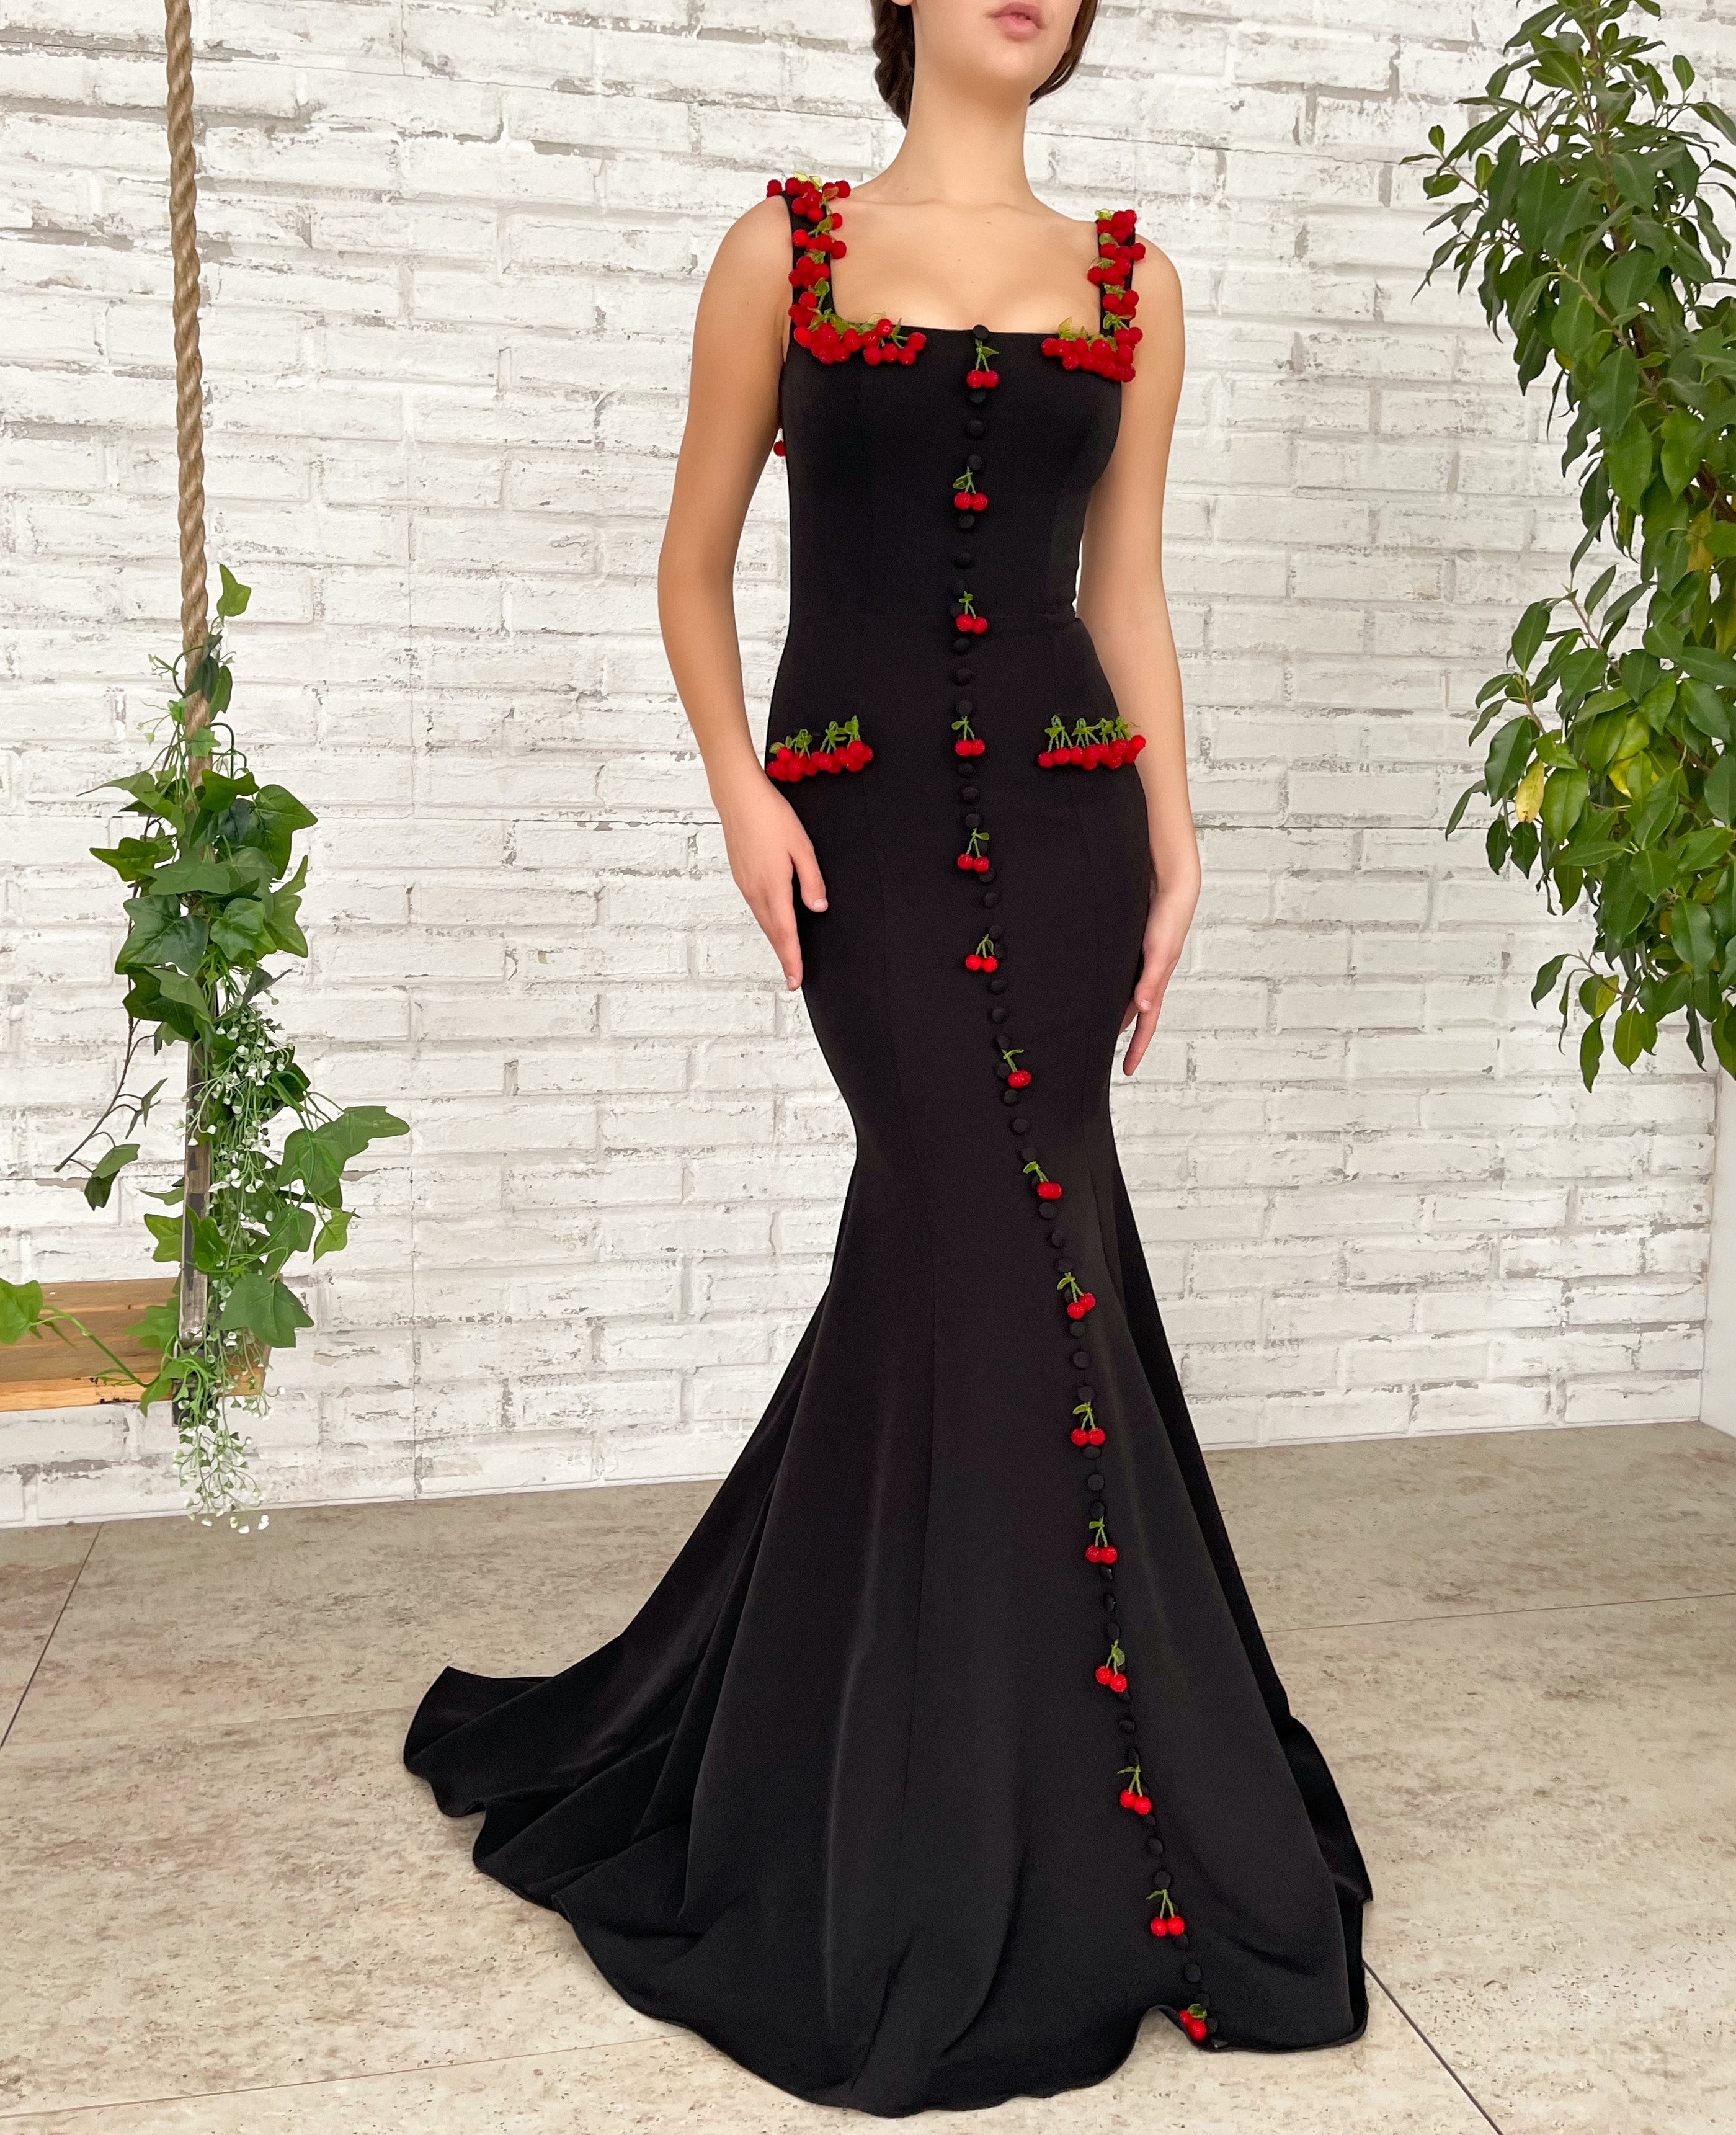 Black mermaid dress with straps and embroidered cherries